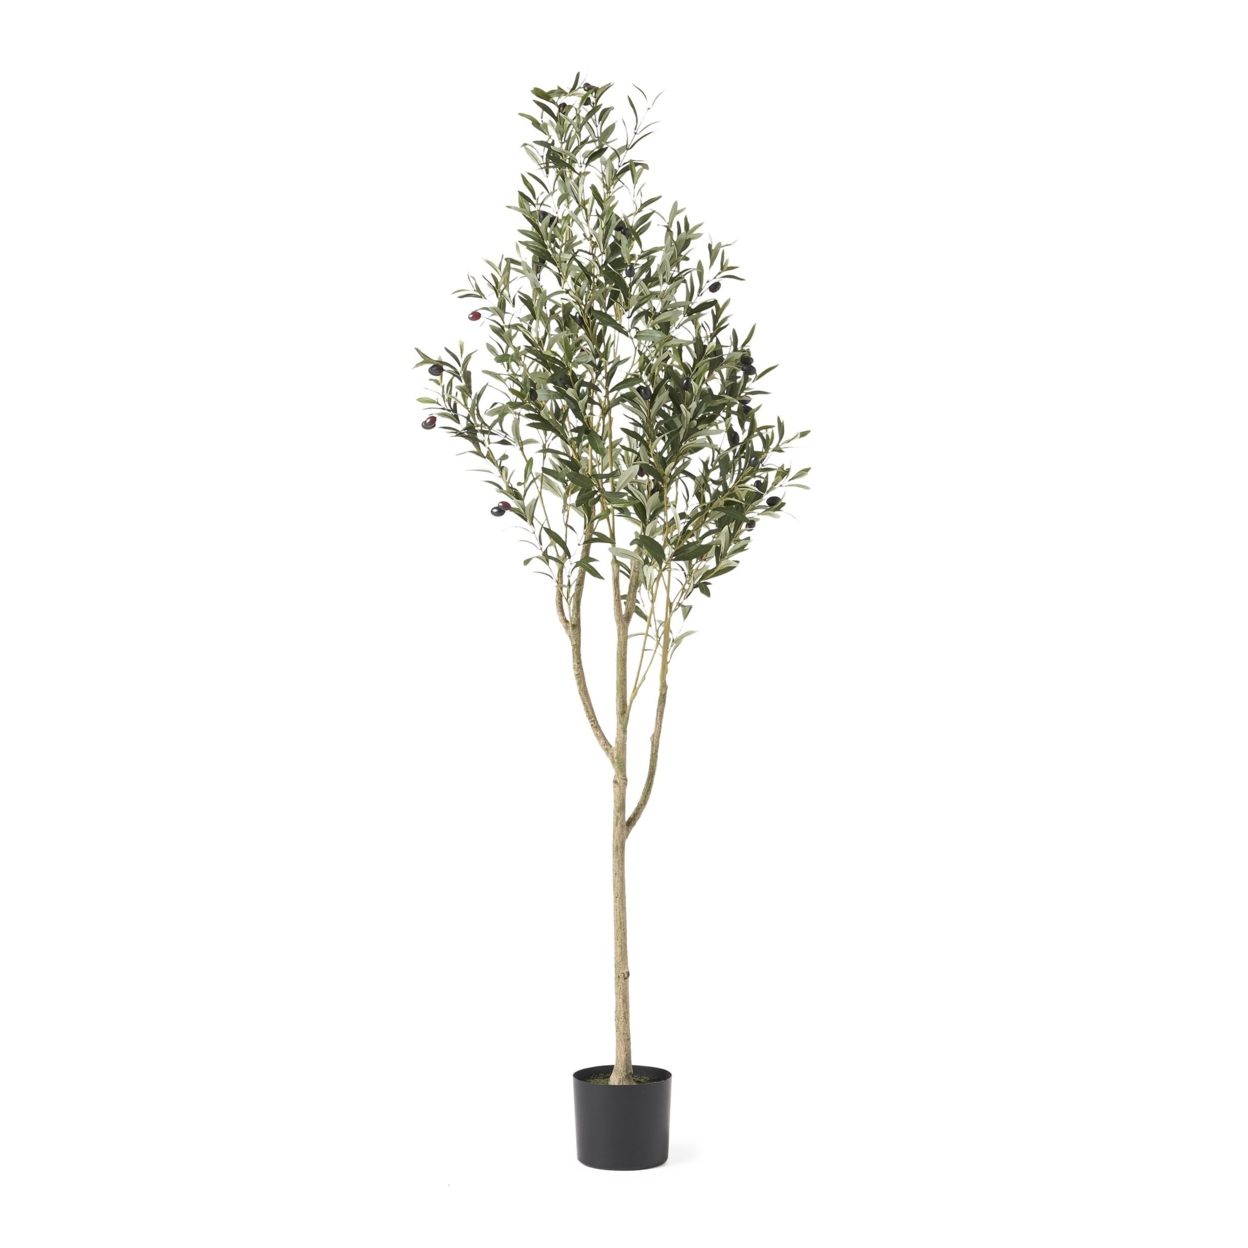 Taos Artificial Tabletop Olive Tree, Green - 4' X 1.5'